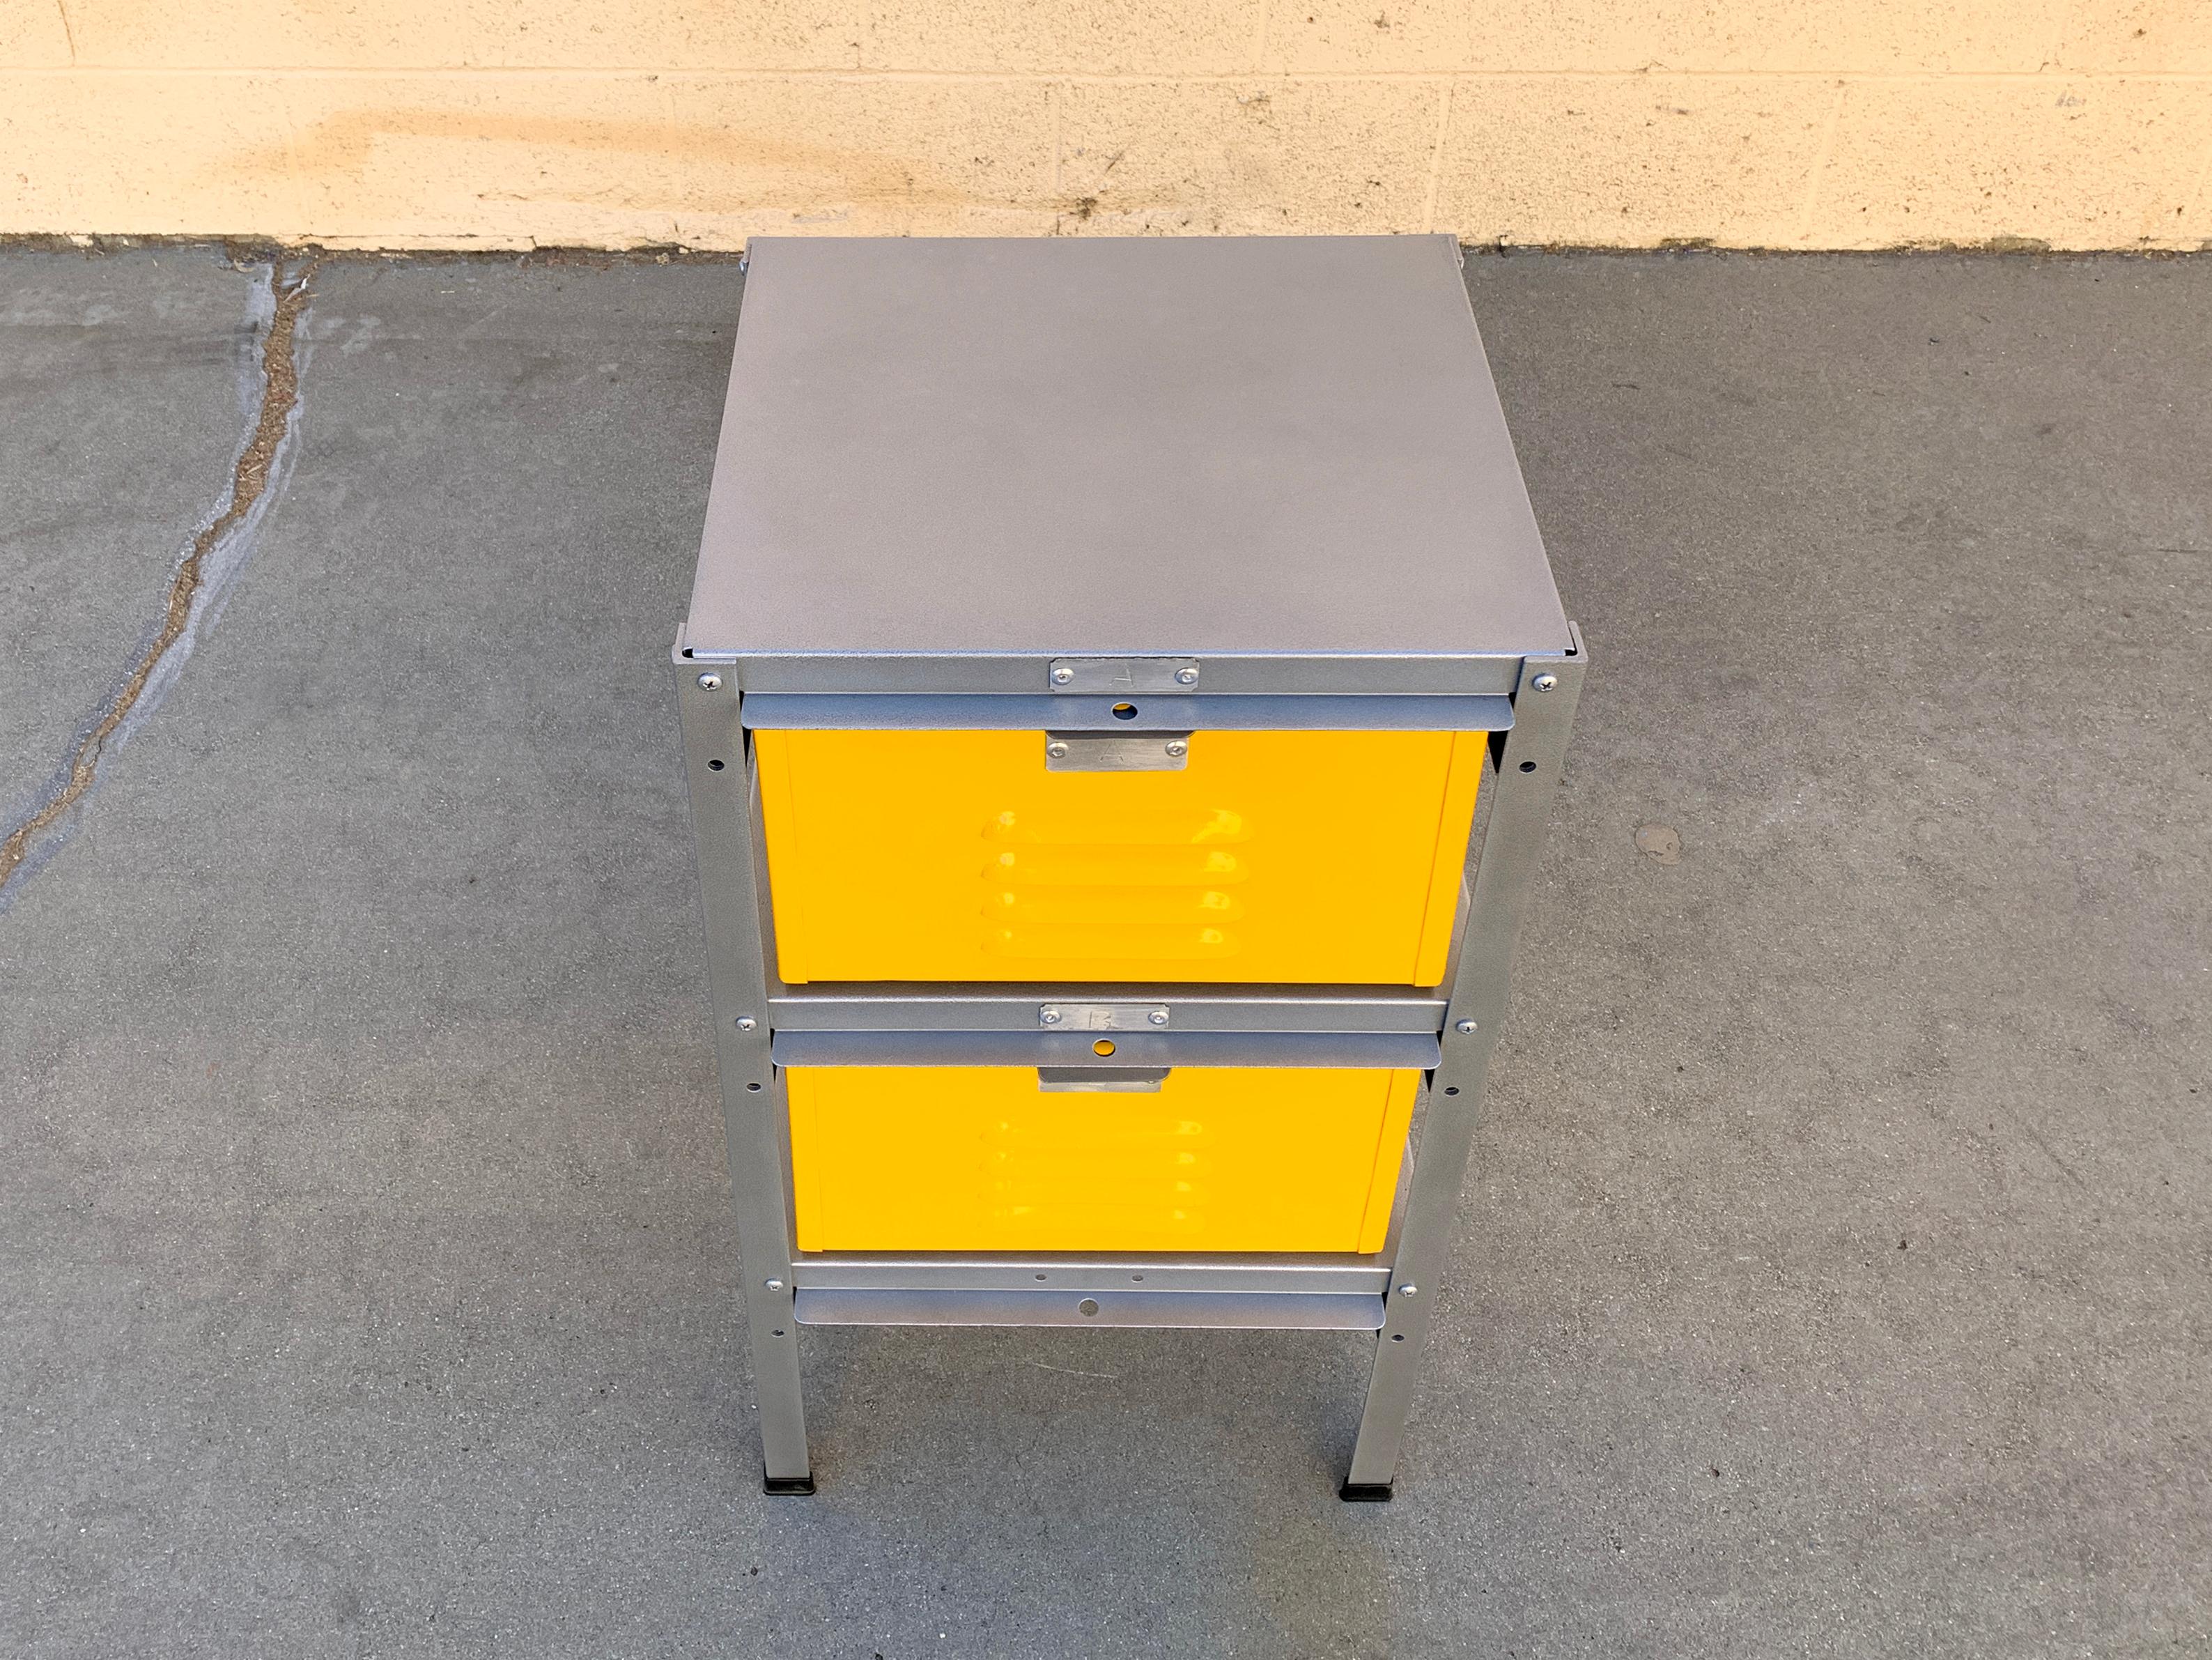 Powder-Coated 1 x 2 Locker Basket Unit in Yellow Ochre, Newly Fabricated to Order For Sale